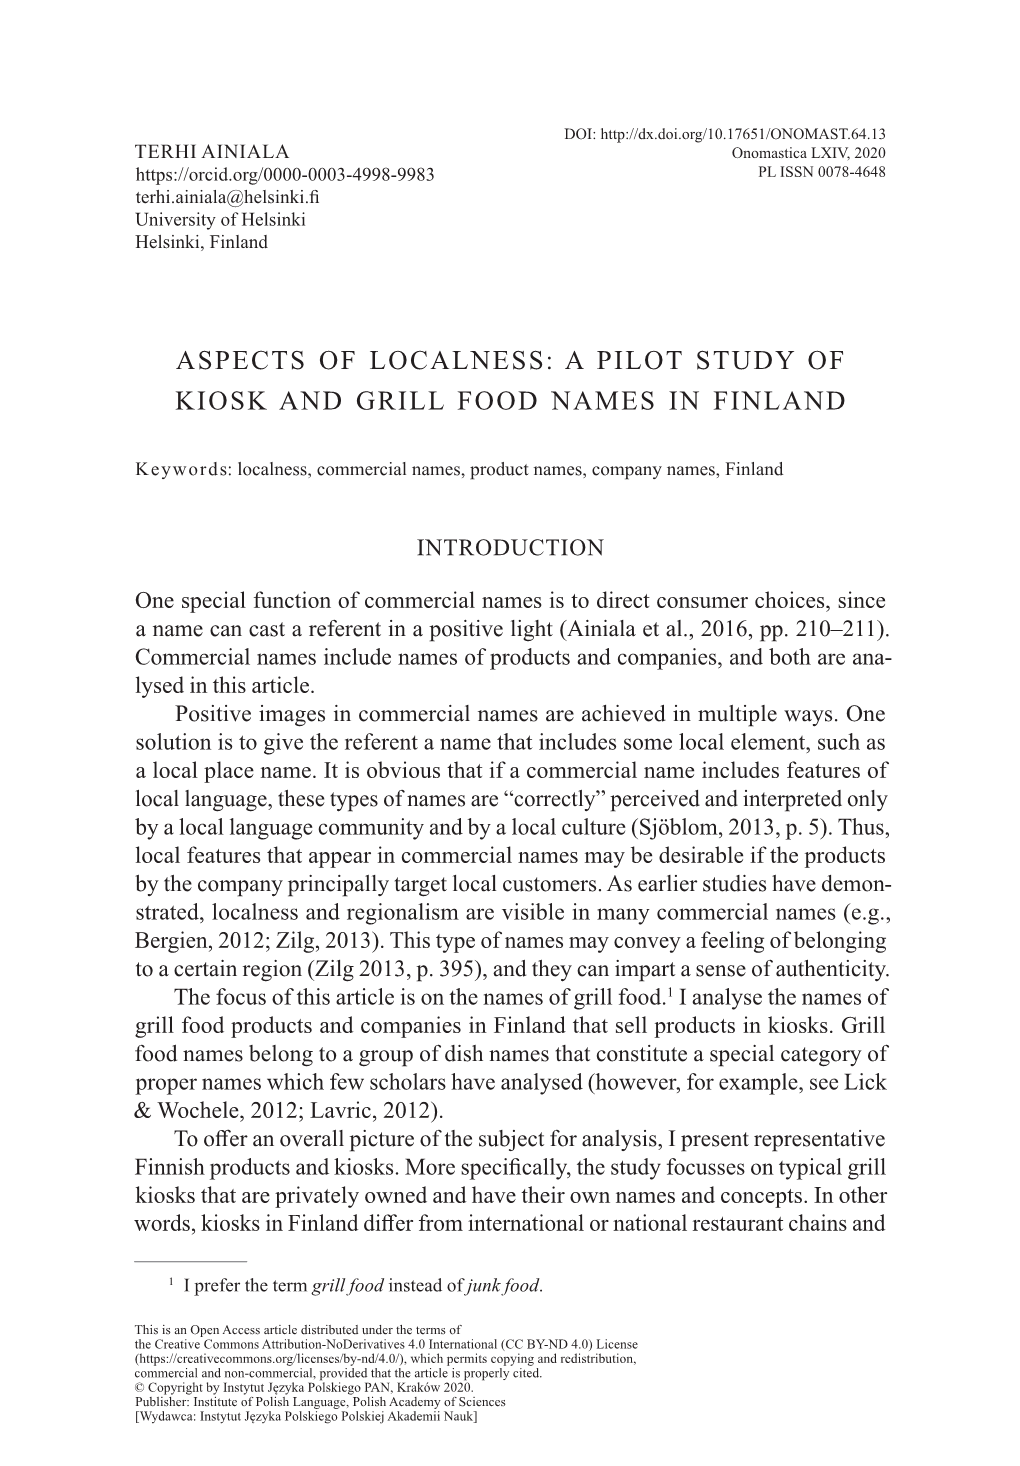 A Pilot Study of Kiosk and Grill Food Names in Finland